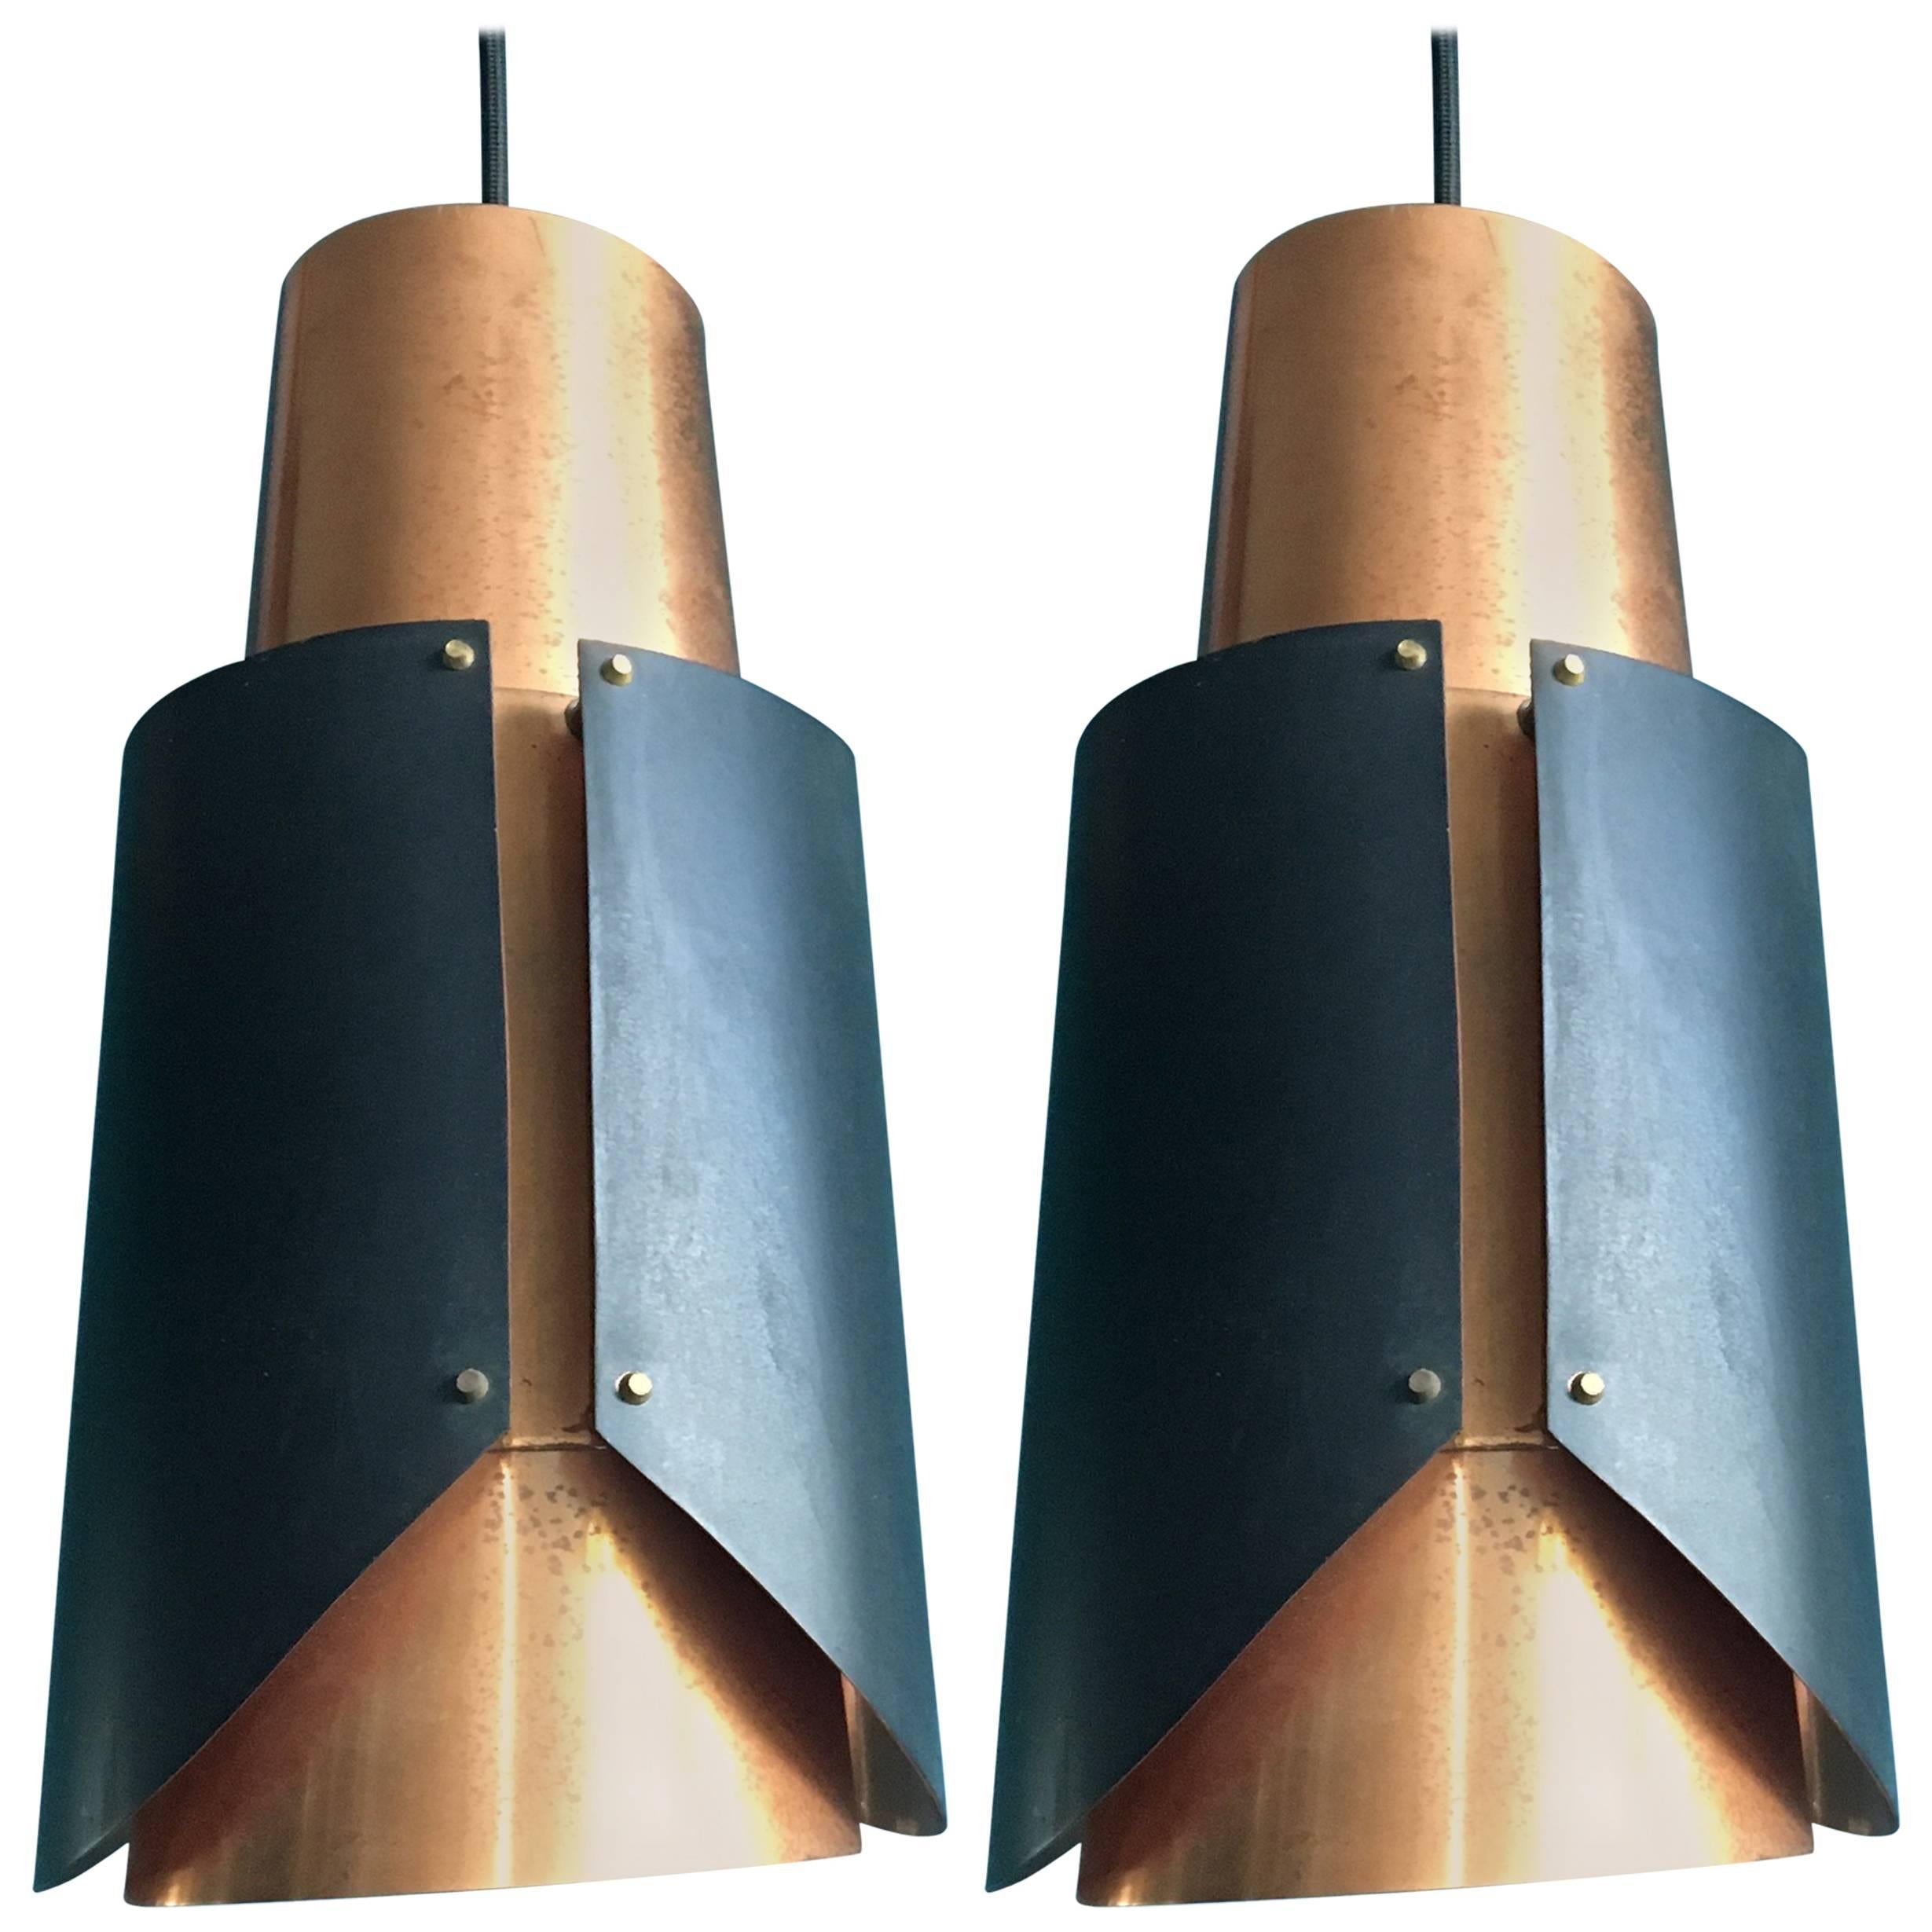 Pair of Vintage Bent Karlby Osterport Pendant Lights Produced by Lyfa in Denmark